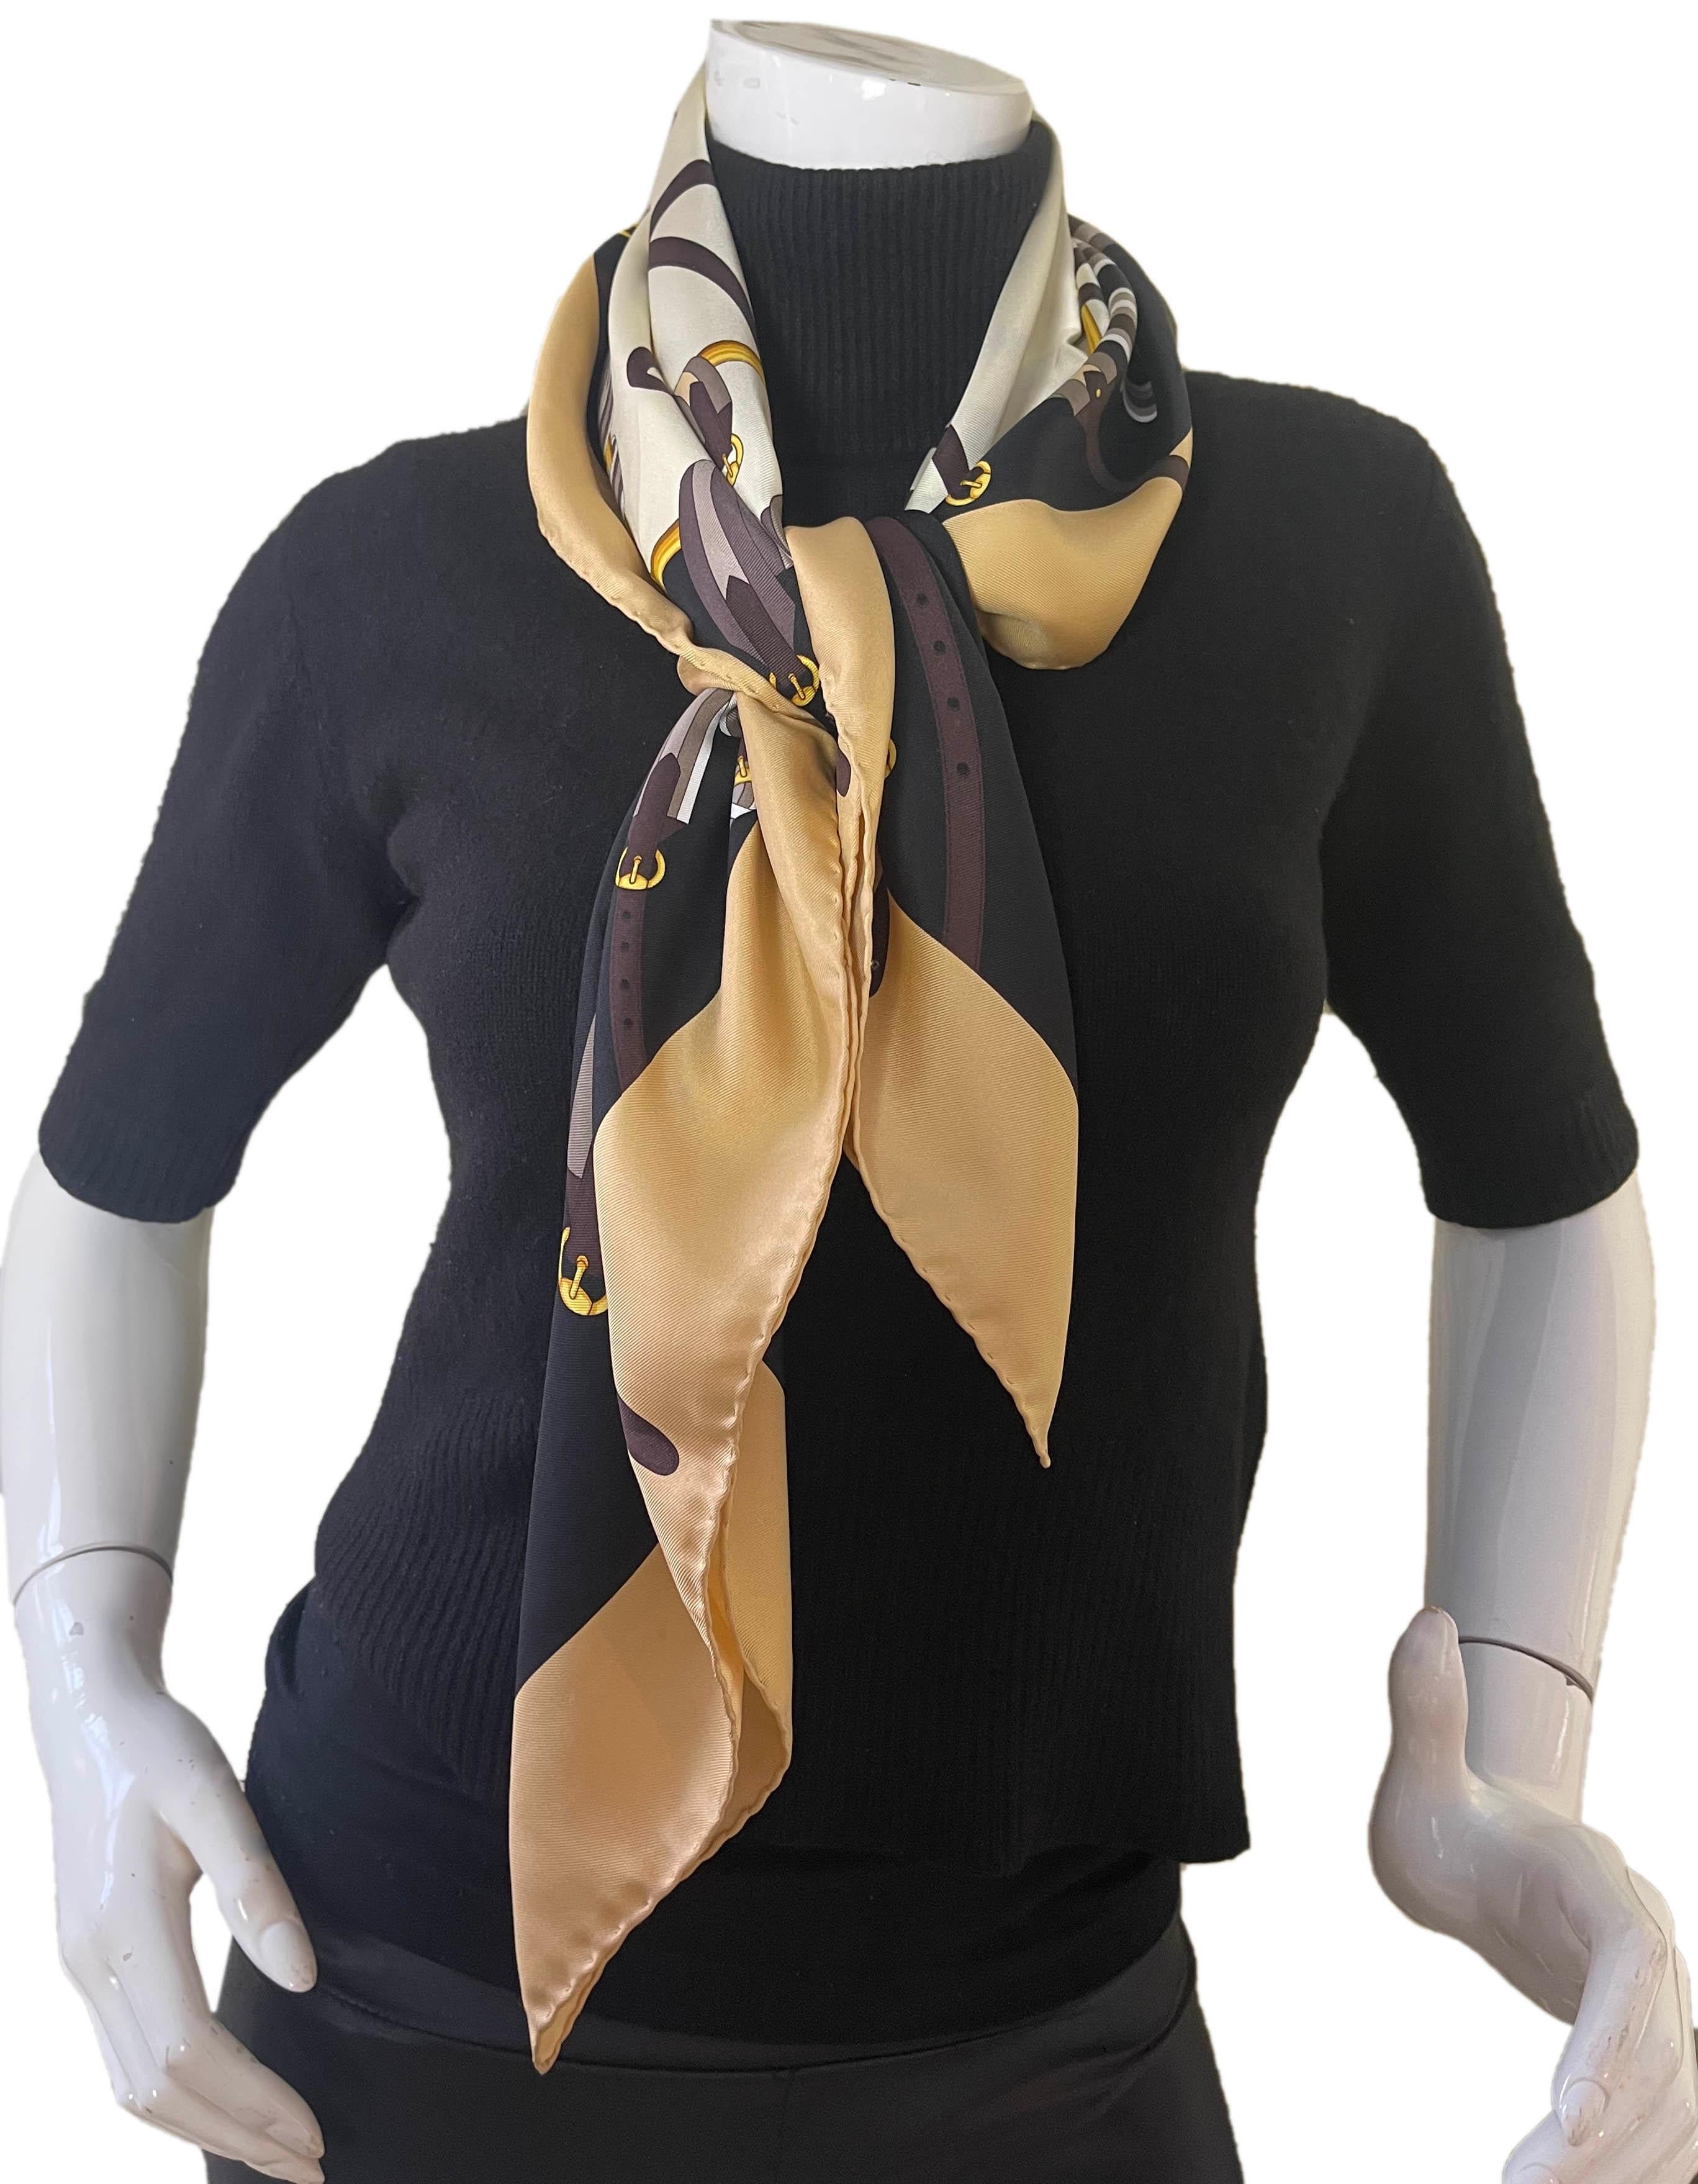 Gucci Beige/Brown/Gold Buckle Print 90cm Silk Scarf

Color: Beige and multicolor
Materials: Silk
Overall Condition: Very good- small stain (see last photo).  Missing tag.

Measurements: 
35”W x 35”H